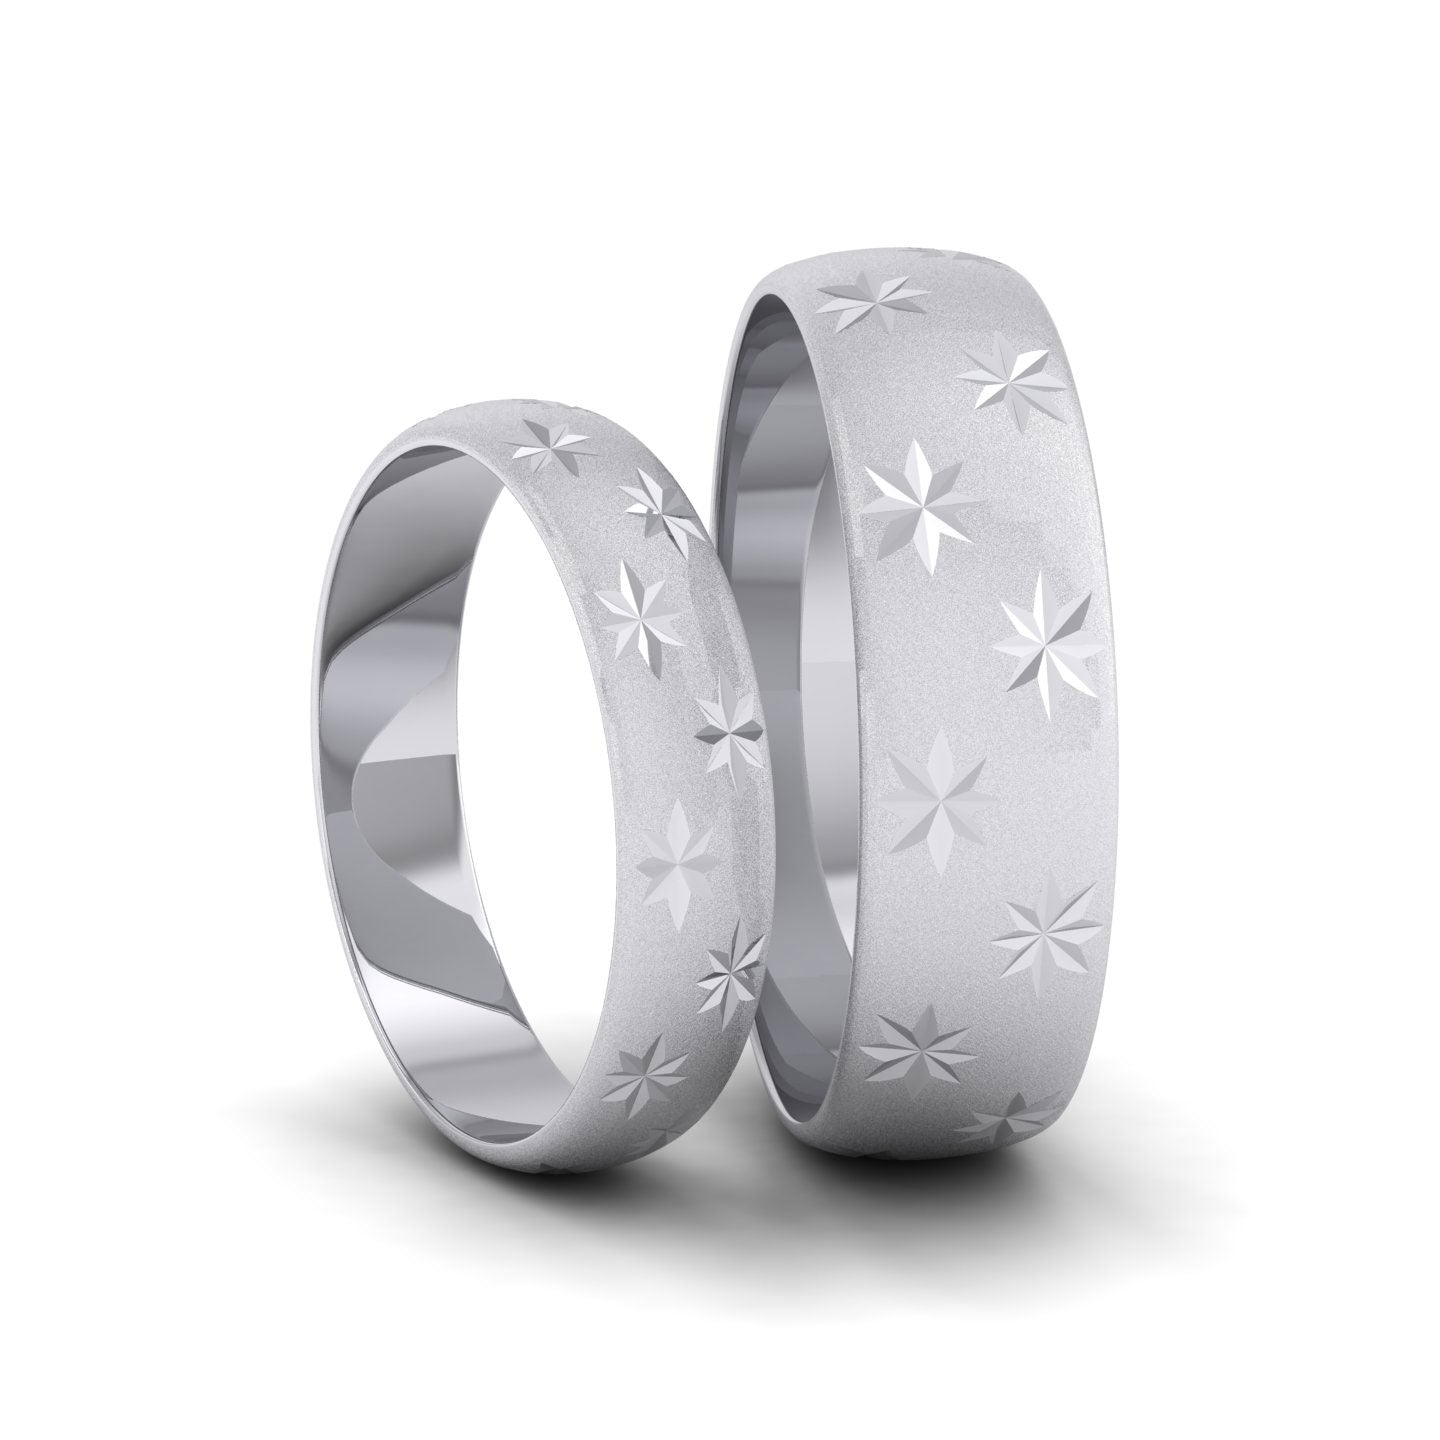 Star Patterned 14ct White Gold 4mm Wedding Ring